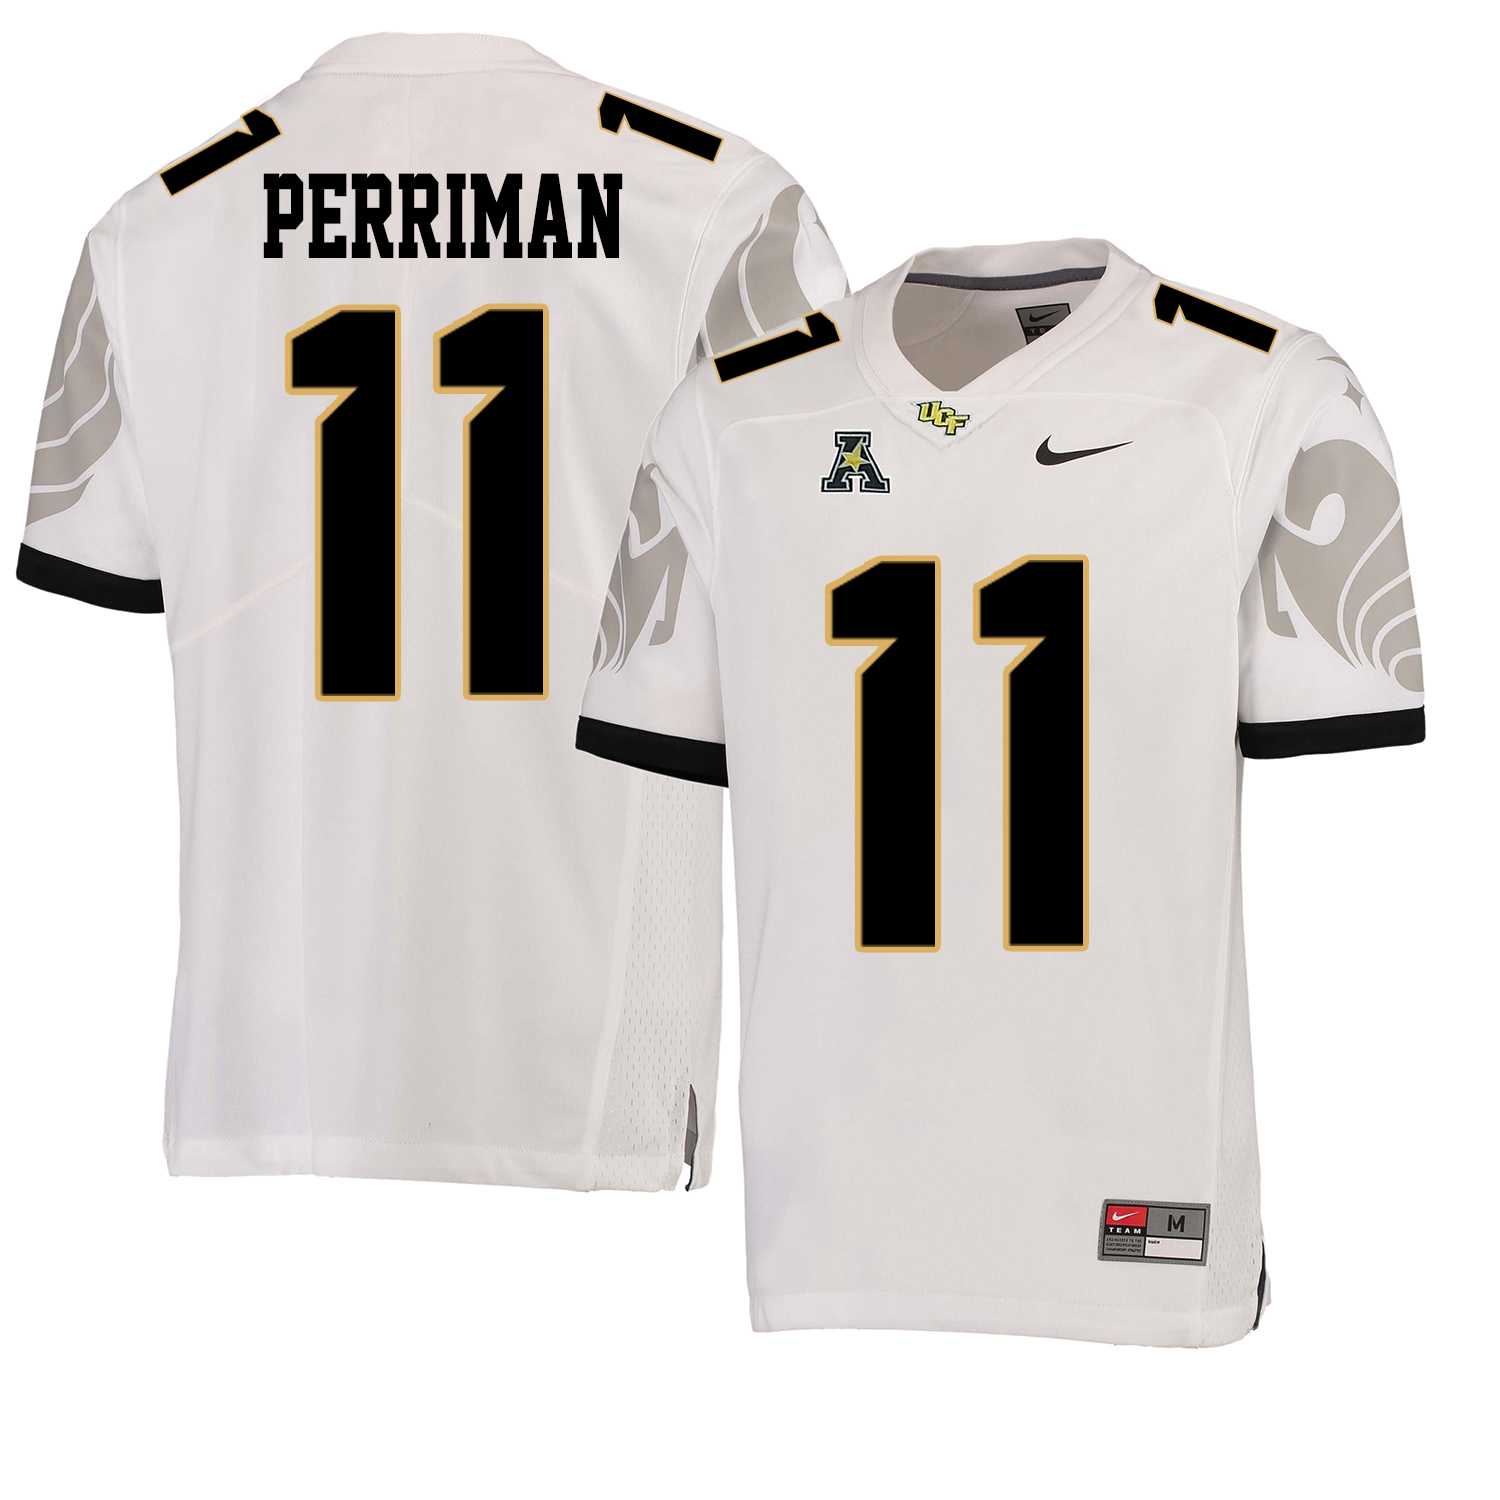 UCF Knights 11 Breshad Perriman White College Football Jersey DingZhi